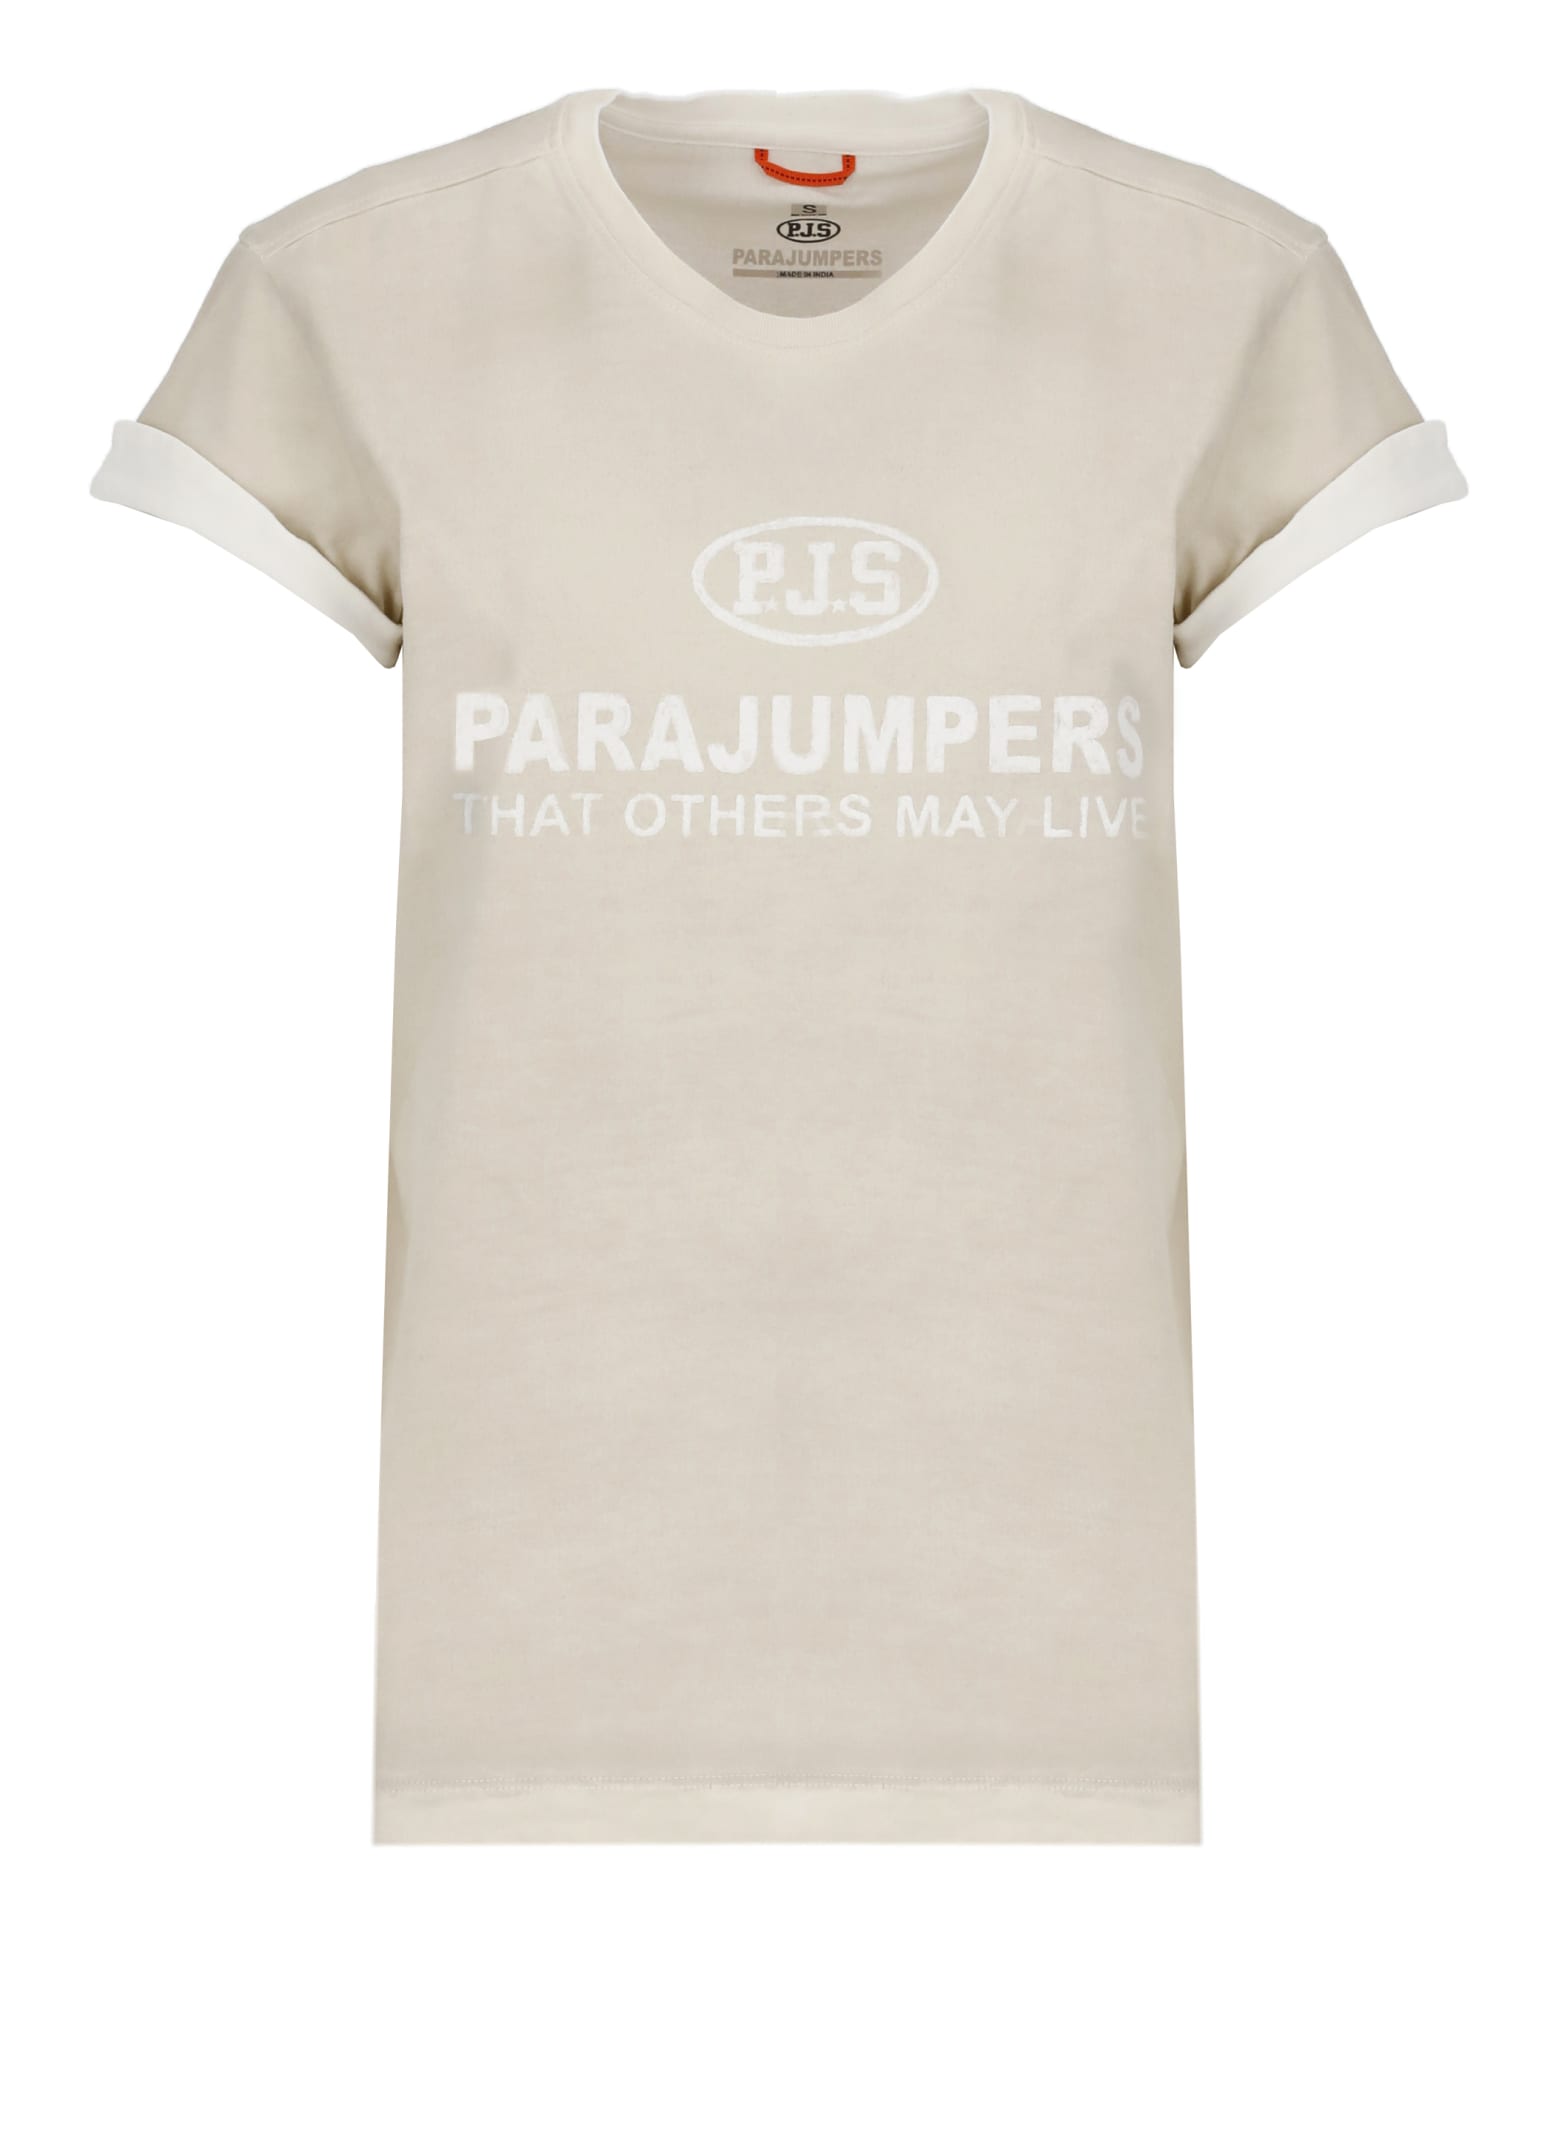 PARAJUMPERS SPRAY T-SHIRT